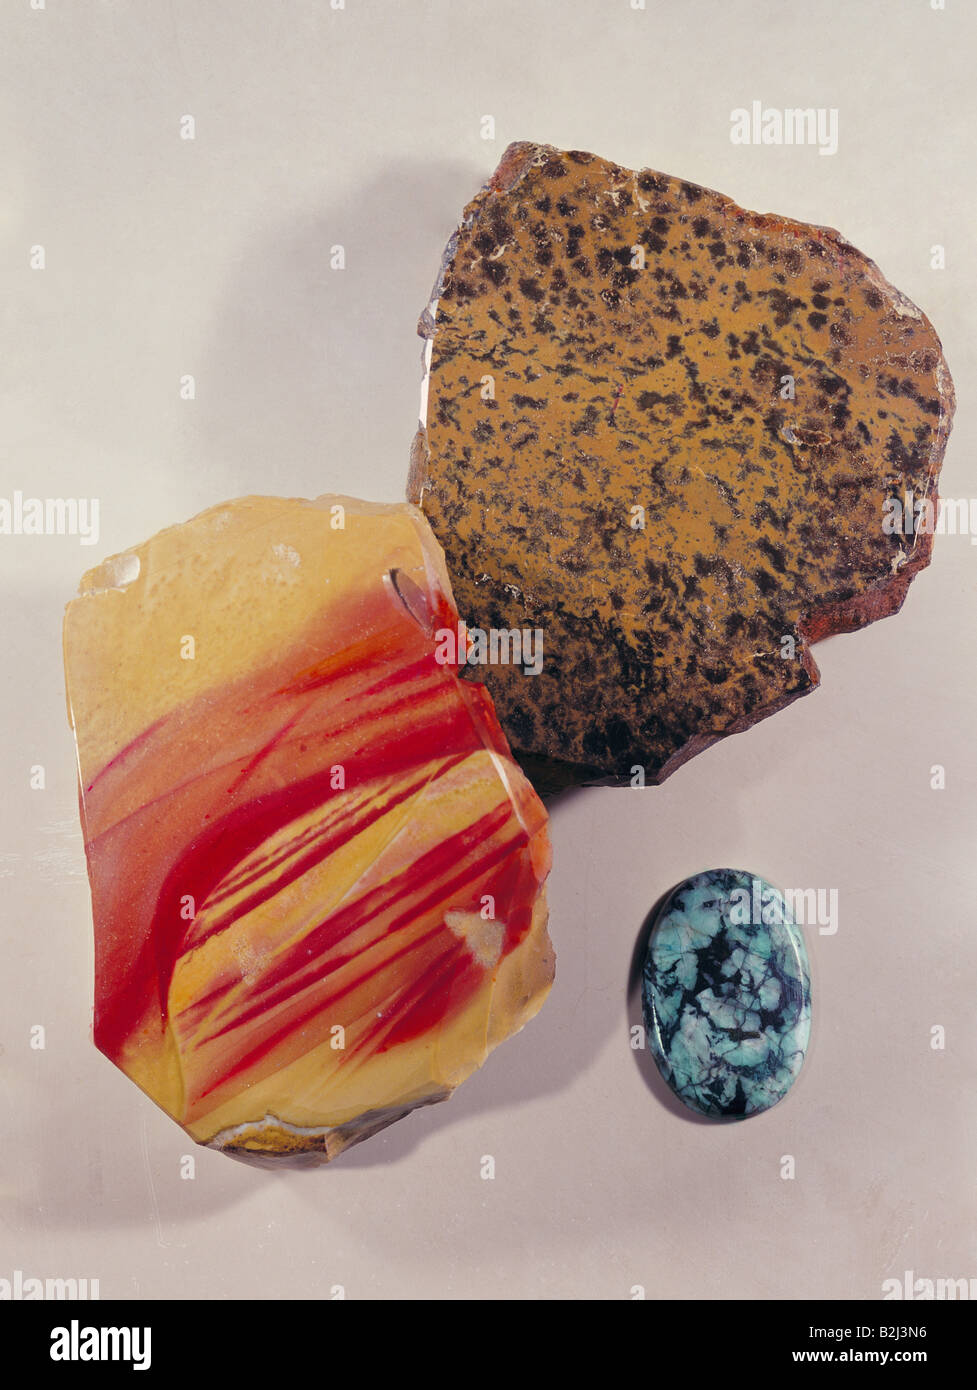 Geologie, Mineralien, Jasper, private Sammlung, Additional-Rights - Clearance-Info - Not-Available Stockfoto